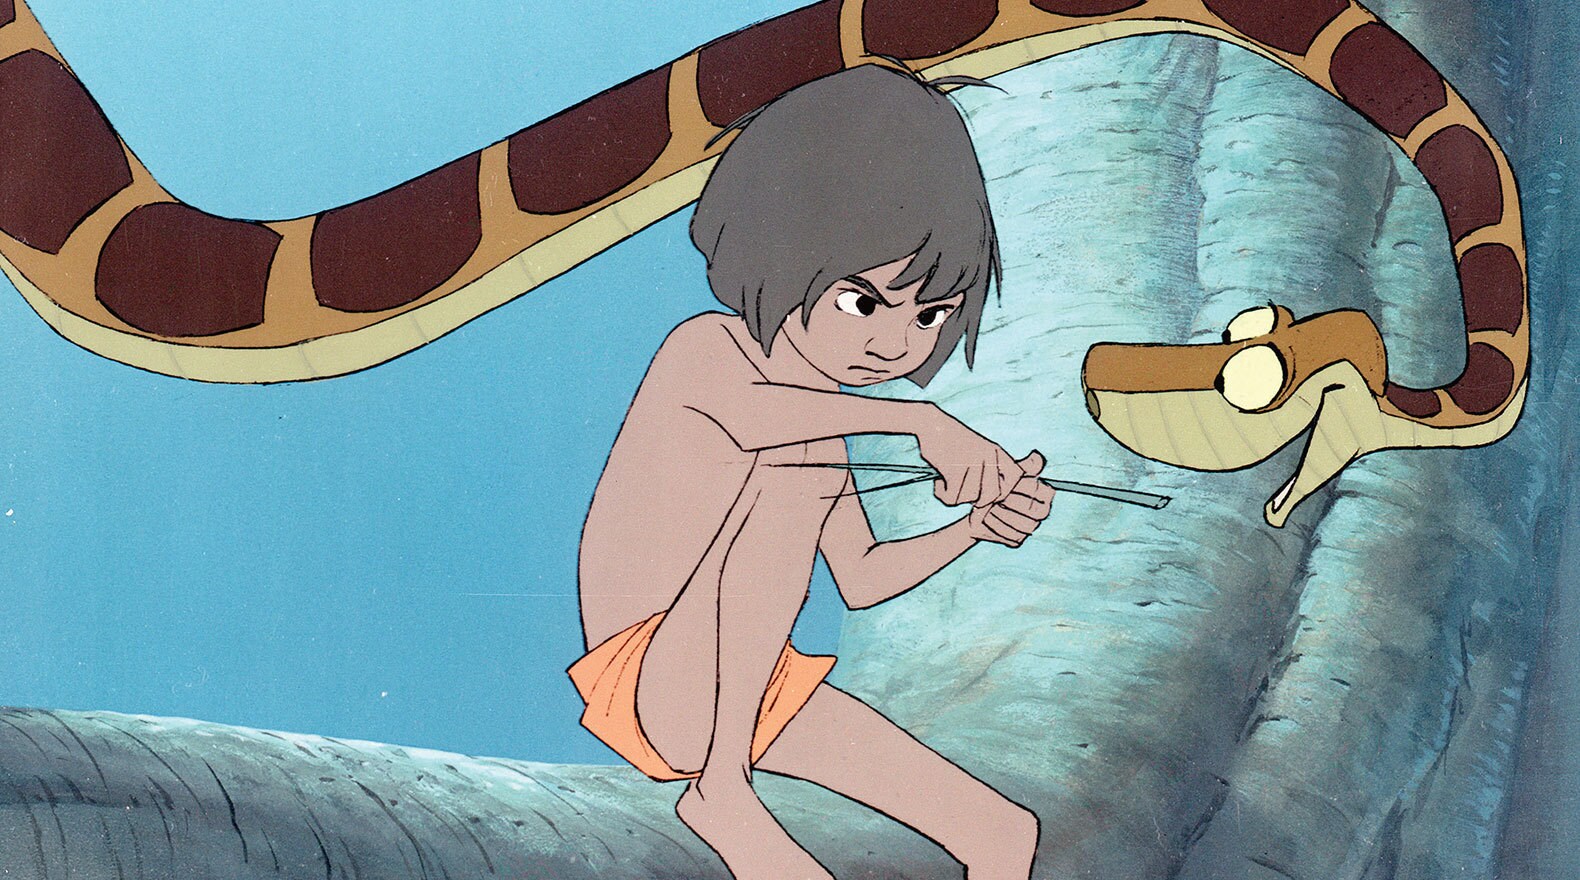 "You told me a lie, Kaa. You said I could trust you!" Mowgli (voice of Bruce Reitherman) and Kaa (voice of Sterling Holloway) from the Disney movie The Jungle Book (1967). 